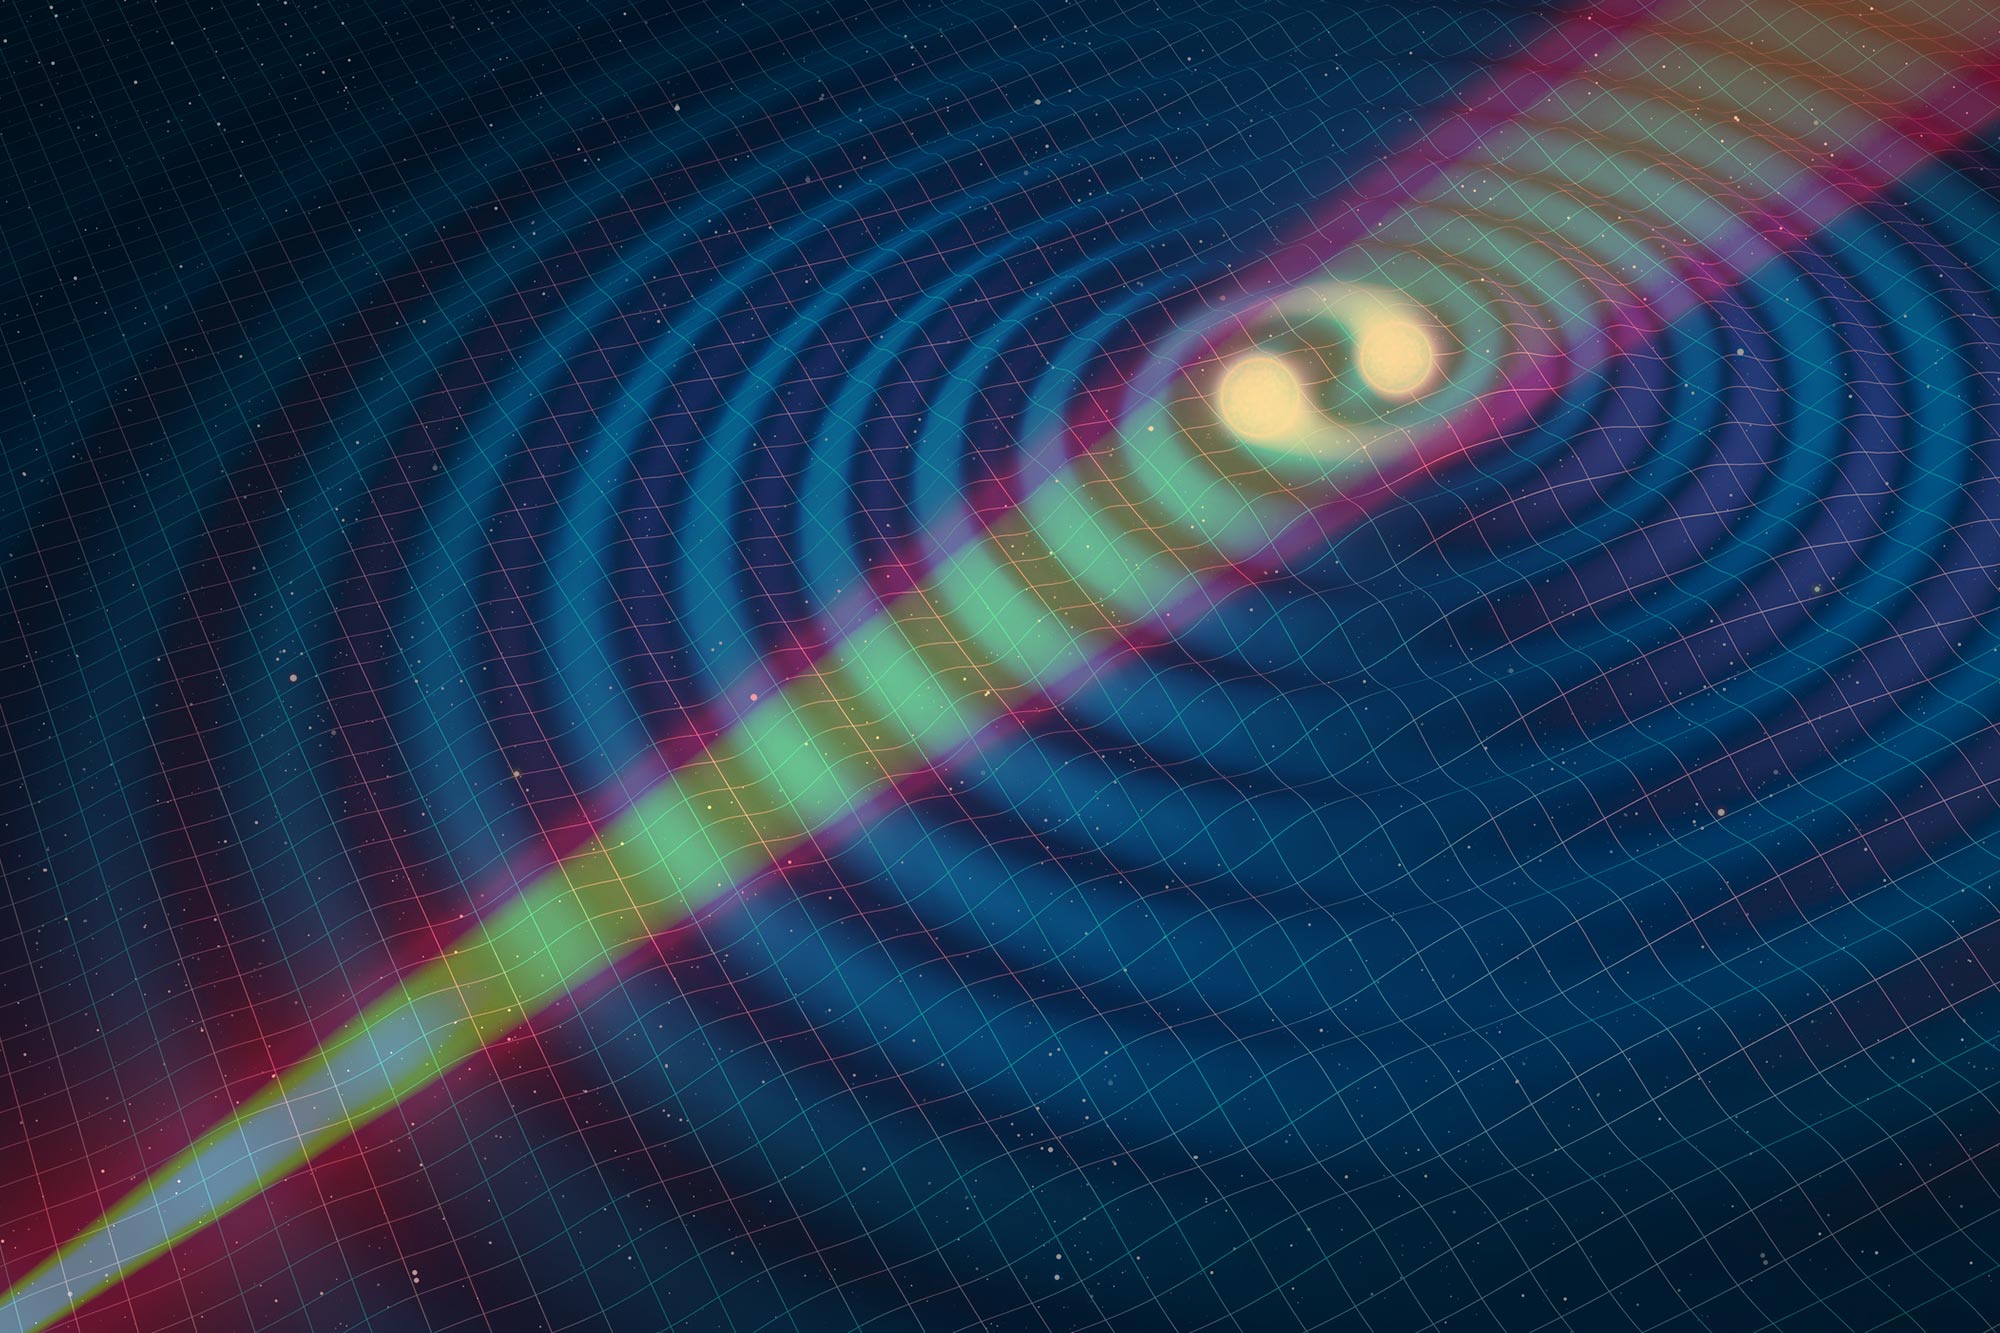 Precision Measurements of Gravity by Trapping Atoms in a Laser Beam – Could Test General Relativity and Fundamental Physics